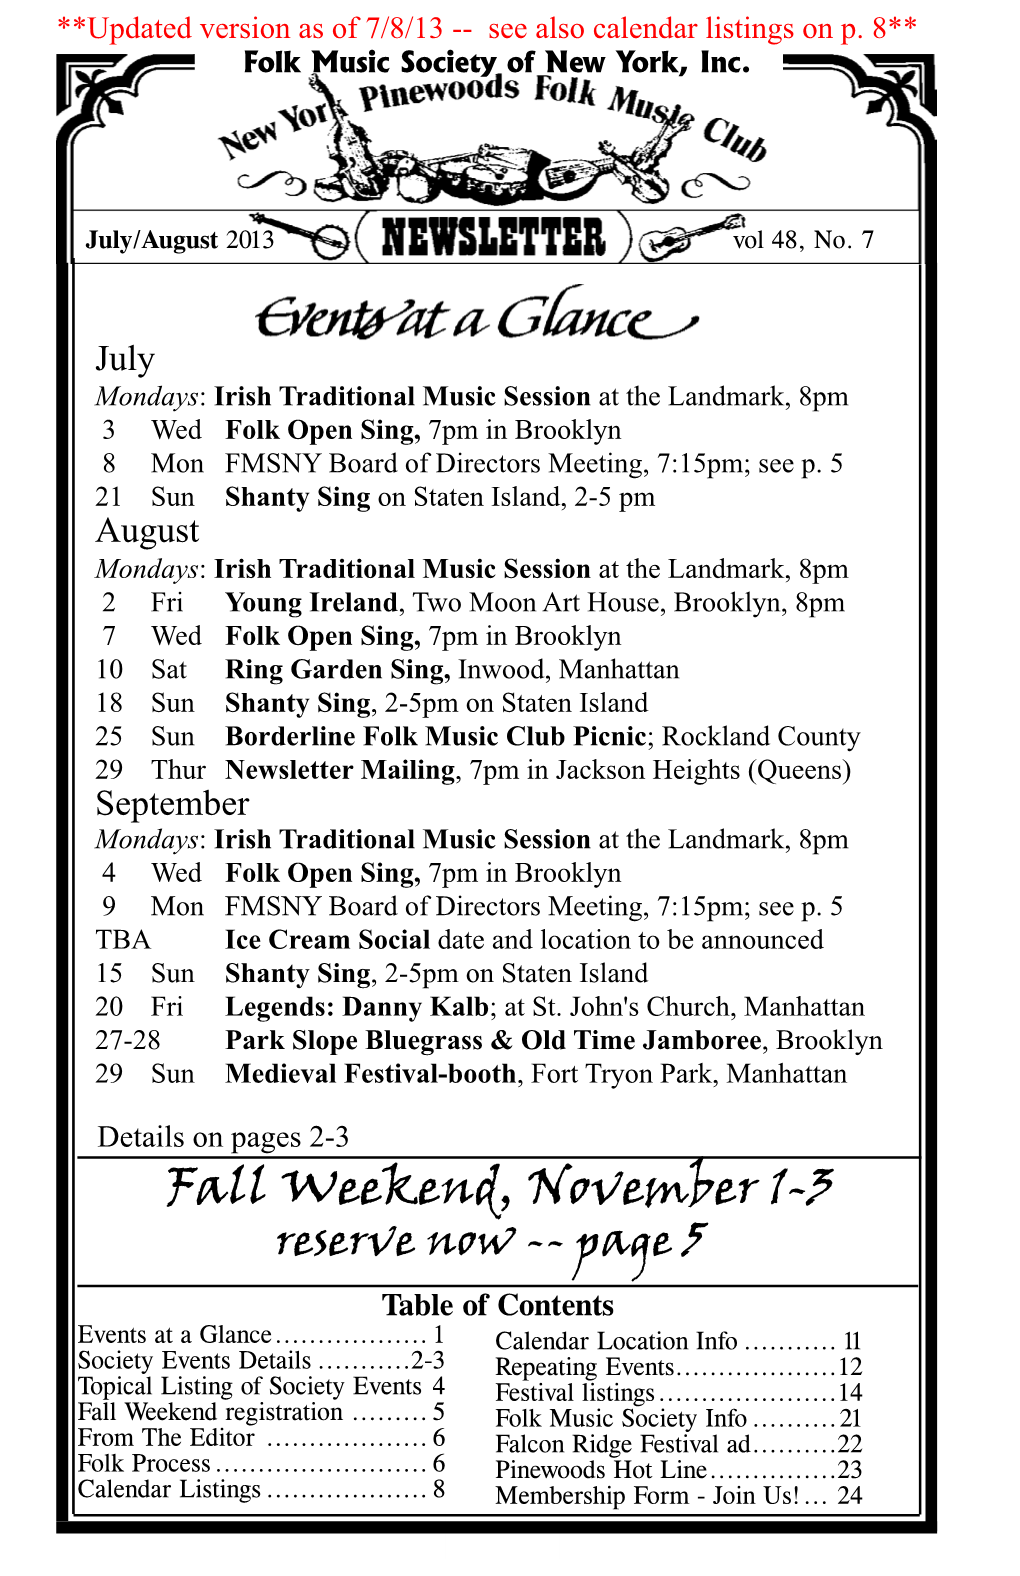 Fall Weekend, November 1-3 Reserve Now -- Page 5 Table of Contents Events at a Glance